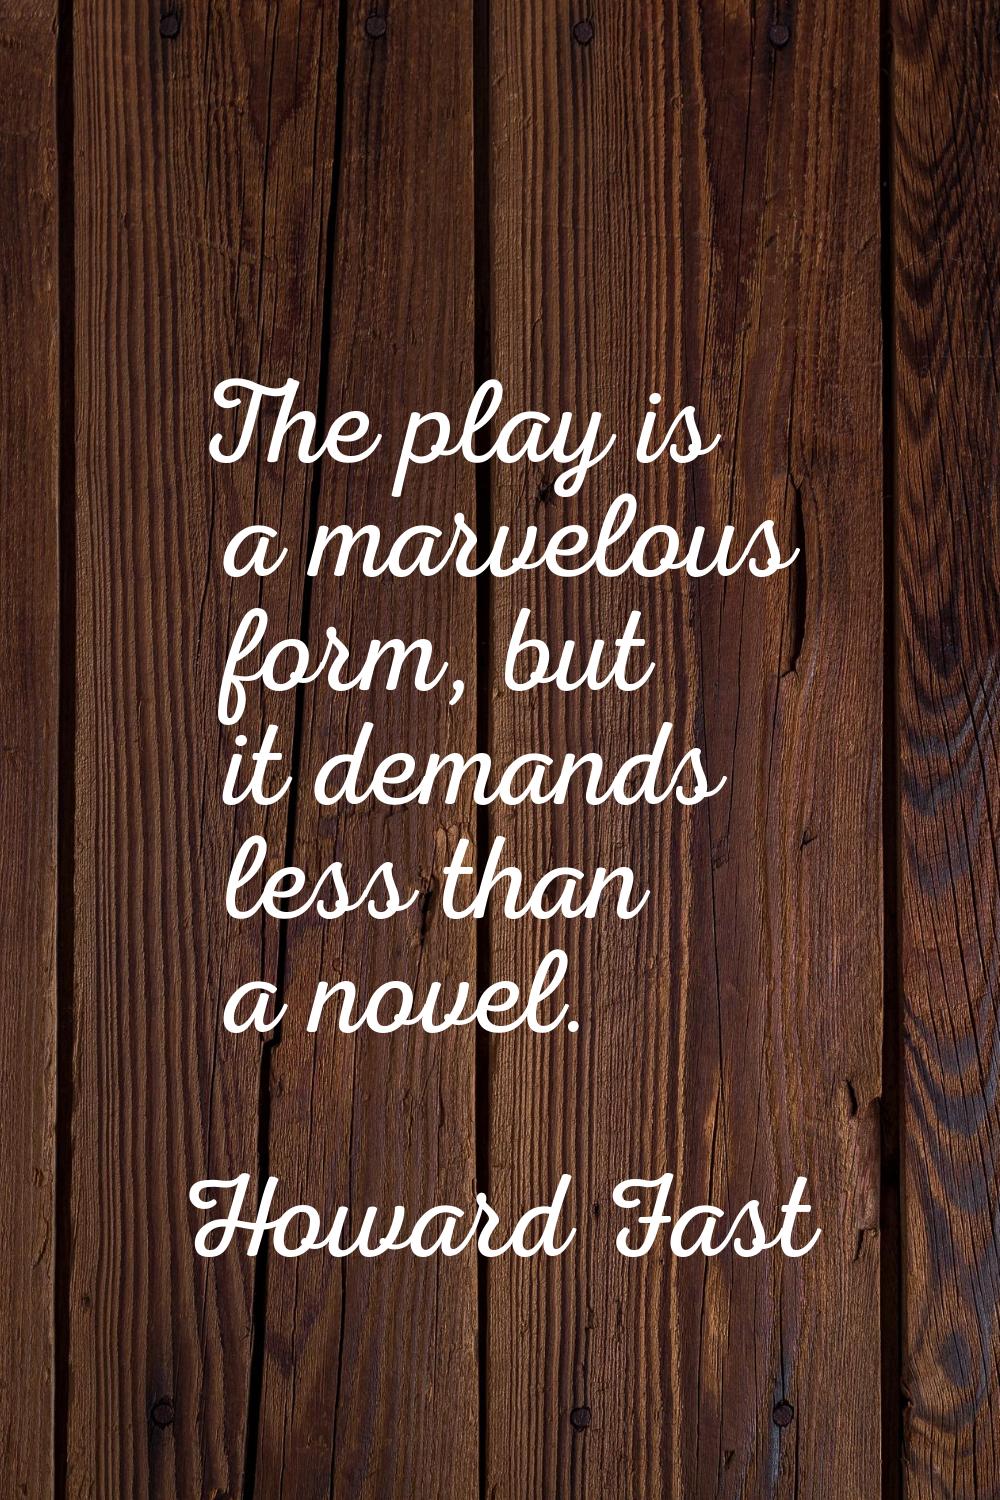 The play is a marvelous form, but it demands less than a novel.